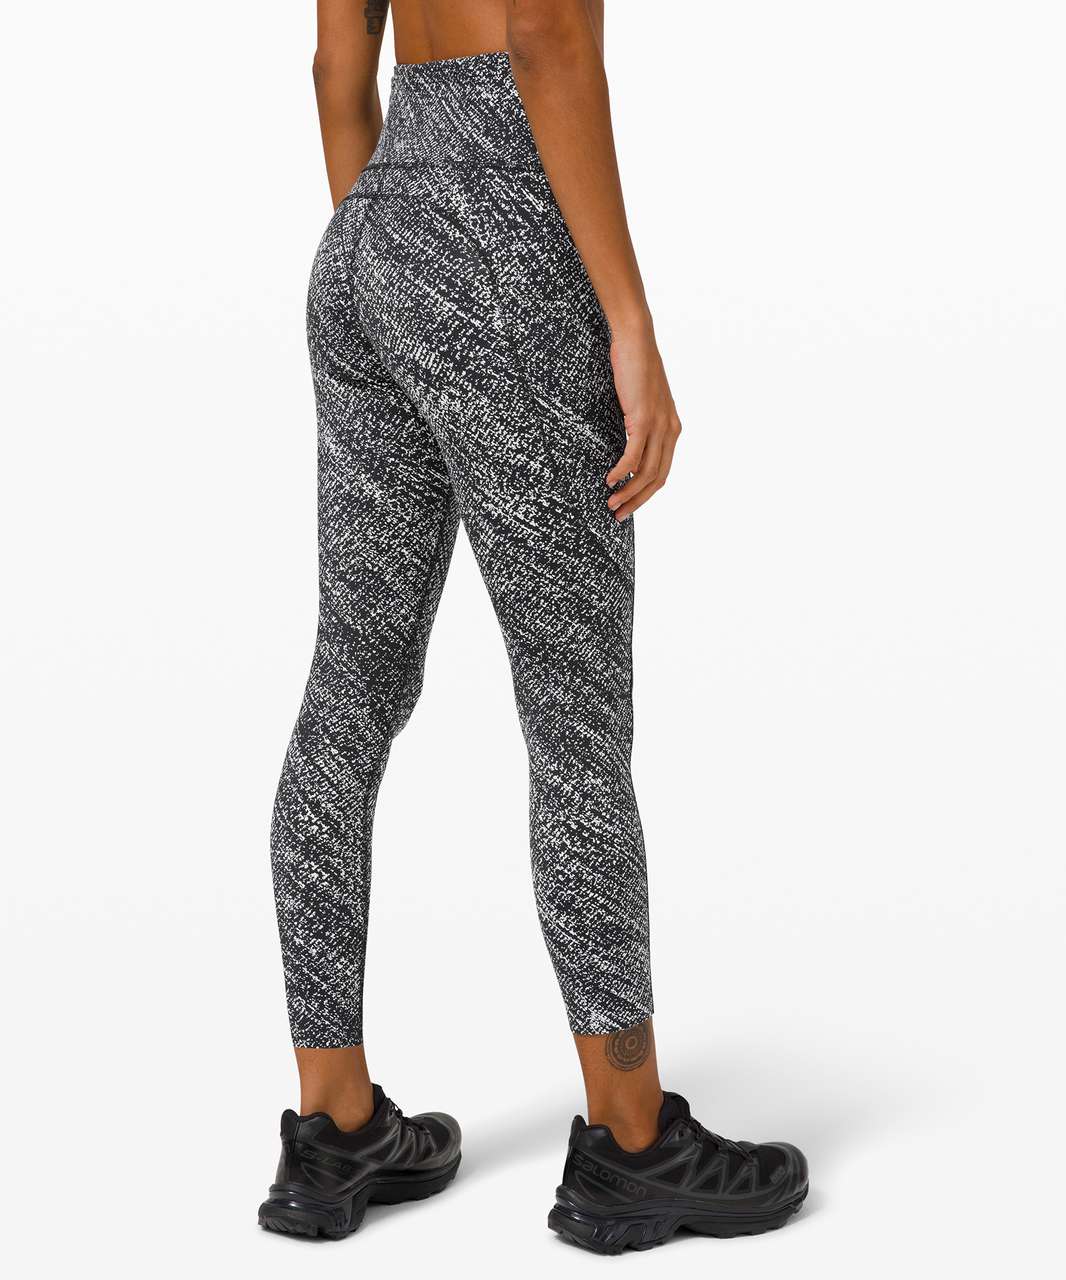 Lululemon Fast and Free High-Rise Crop 23" *Non-Reflective - Speckle Sprint Alpine White Black